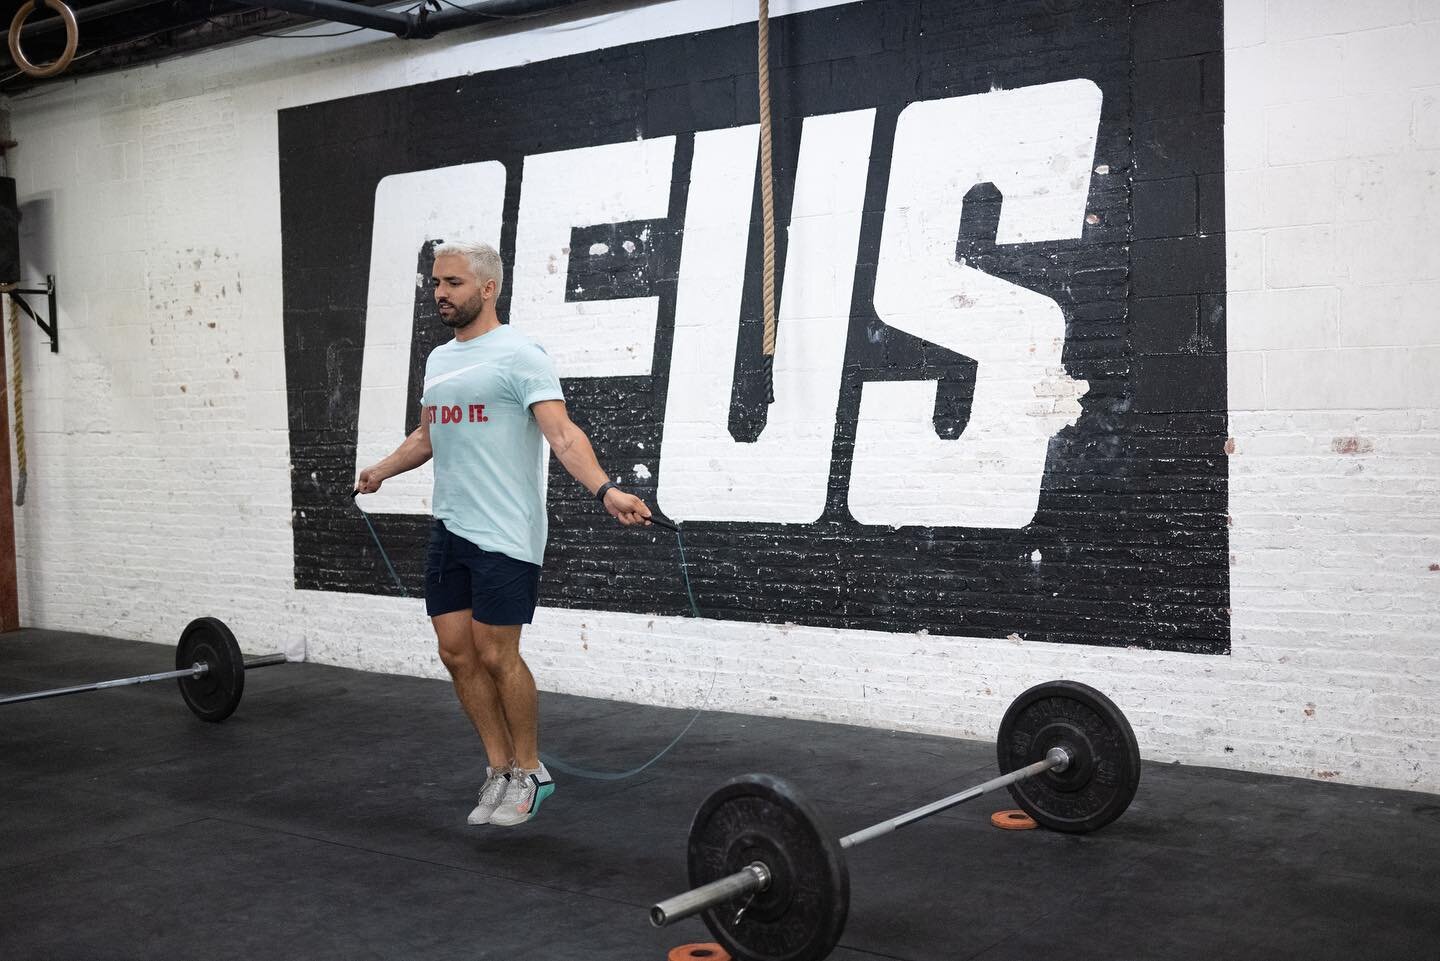 WOD Wednesday

&bull; weightlifting &bull;
power clean + deep catch power clean + clean
6x(1+1+1) &mdash; go every 2min

&bull; metcon &bull;
4 rounds for time
60 double unders
30 wall balls
15 toes to bar
time cap = 14min

📸 @martsromero
🏋🏻&zwj;♂